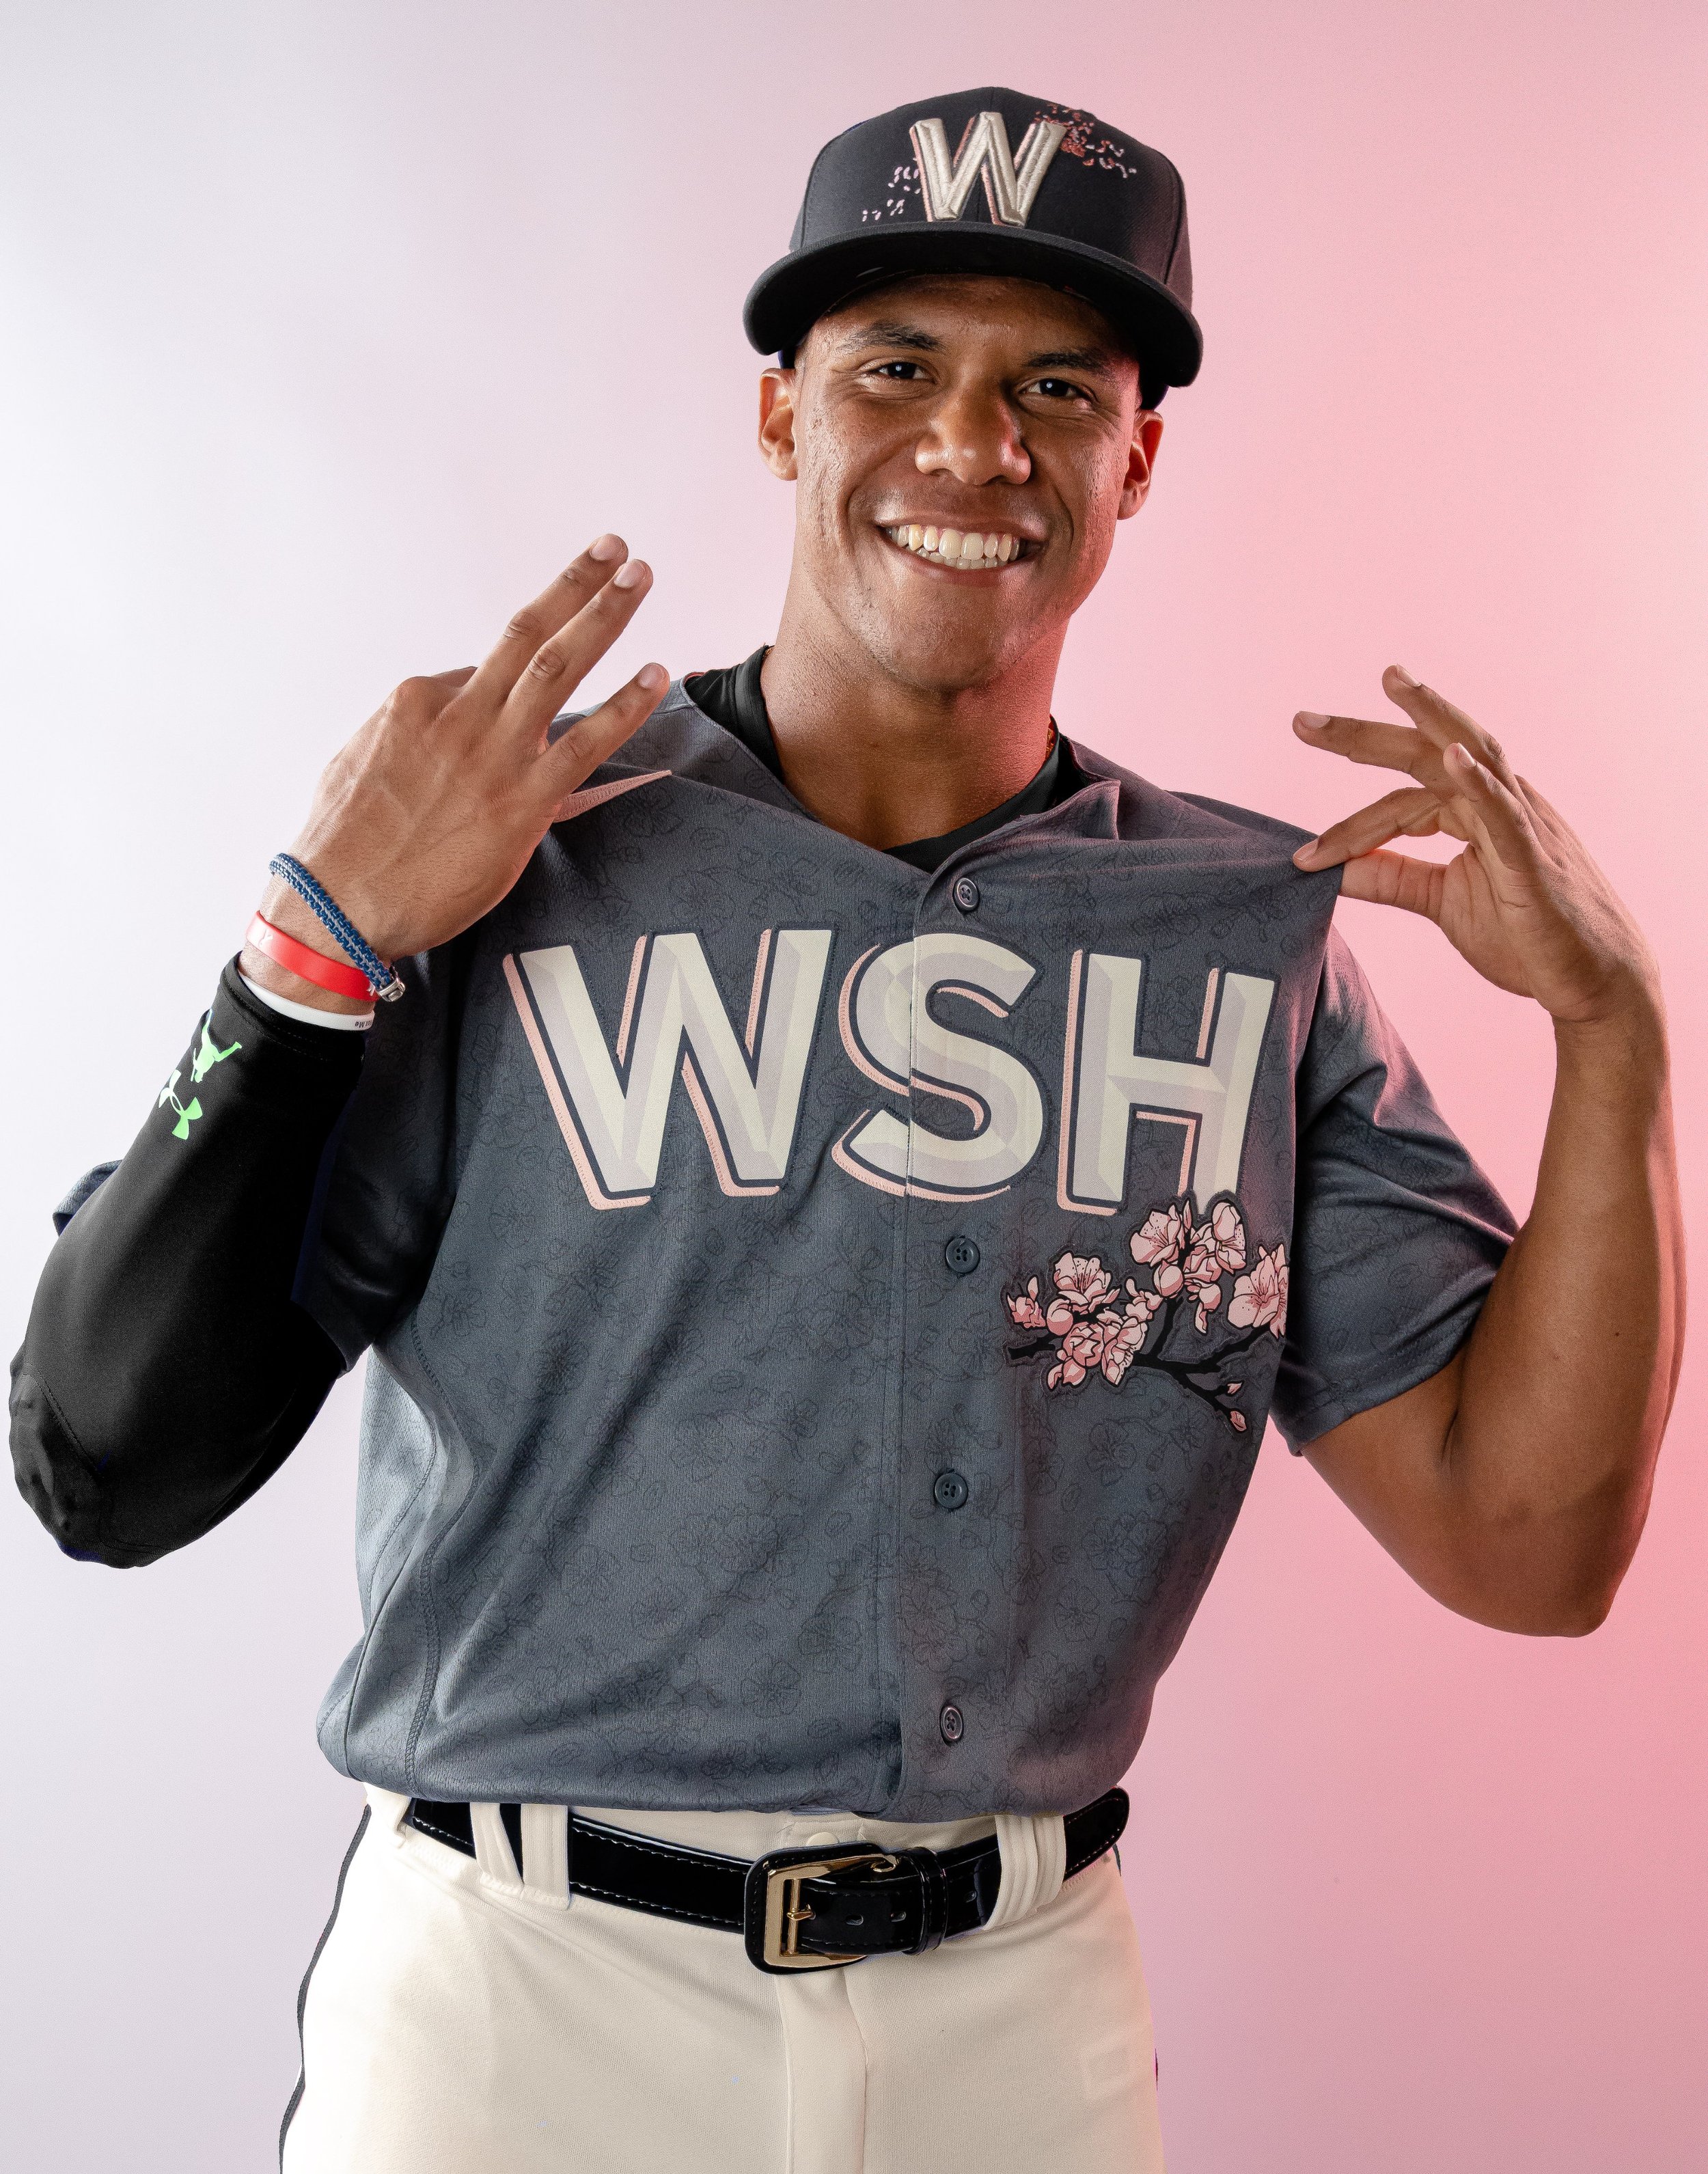 nationals city edition jersey